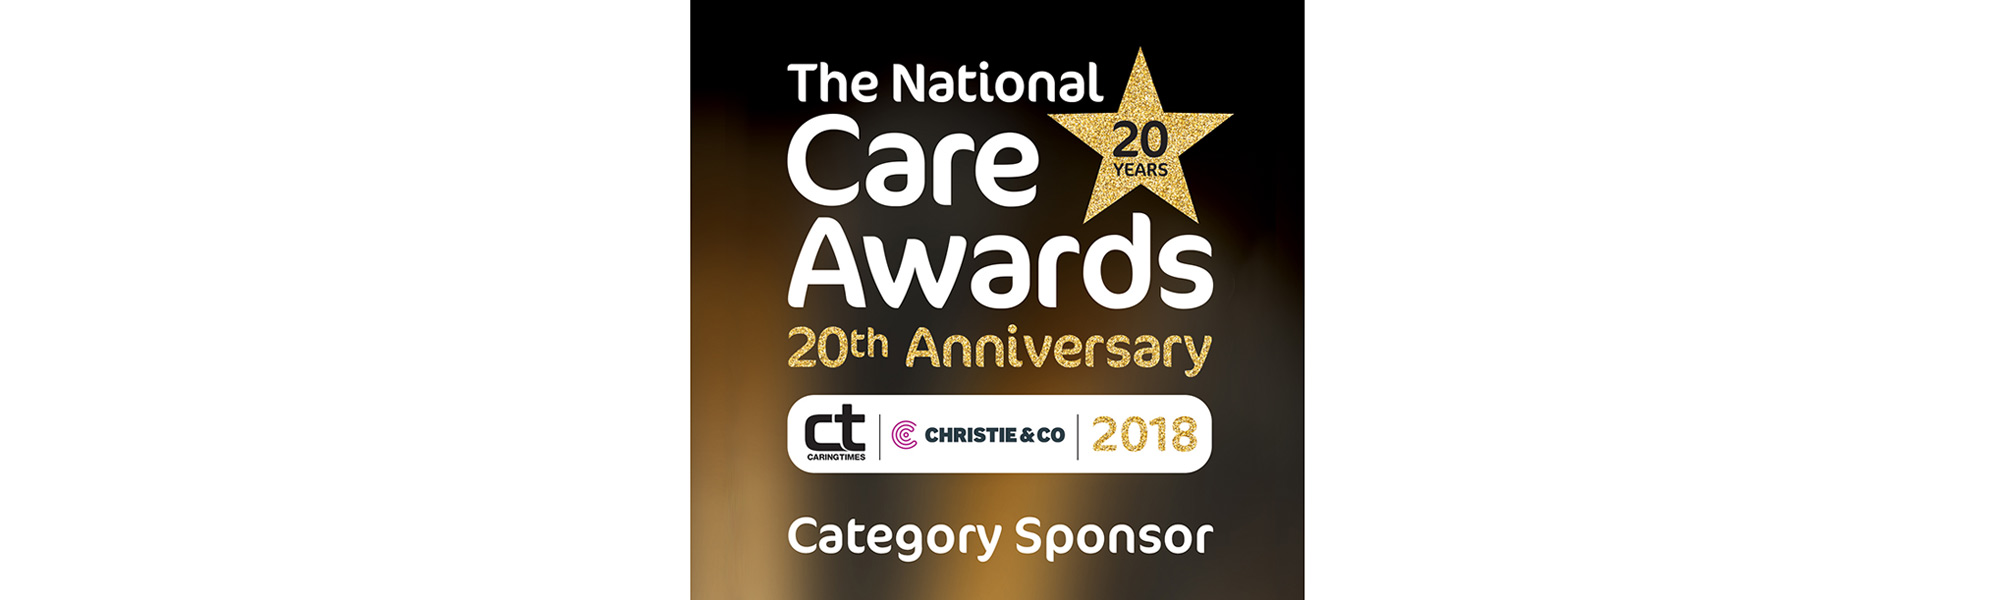 The National Care Awards 2018